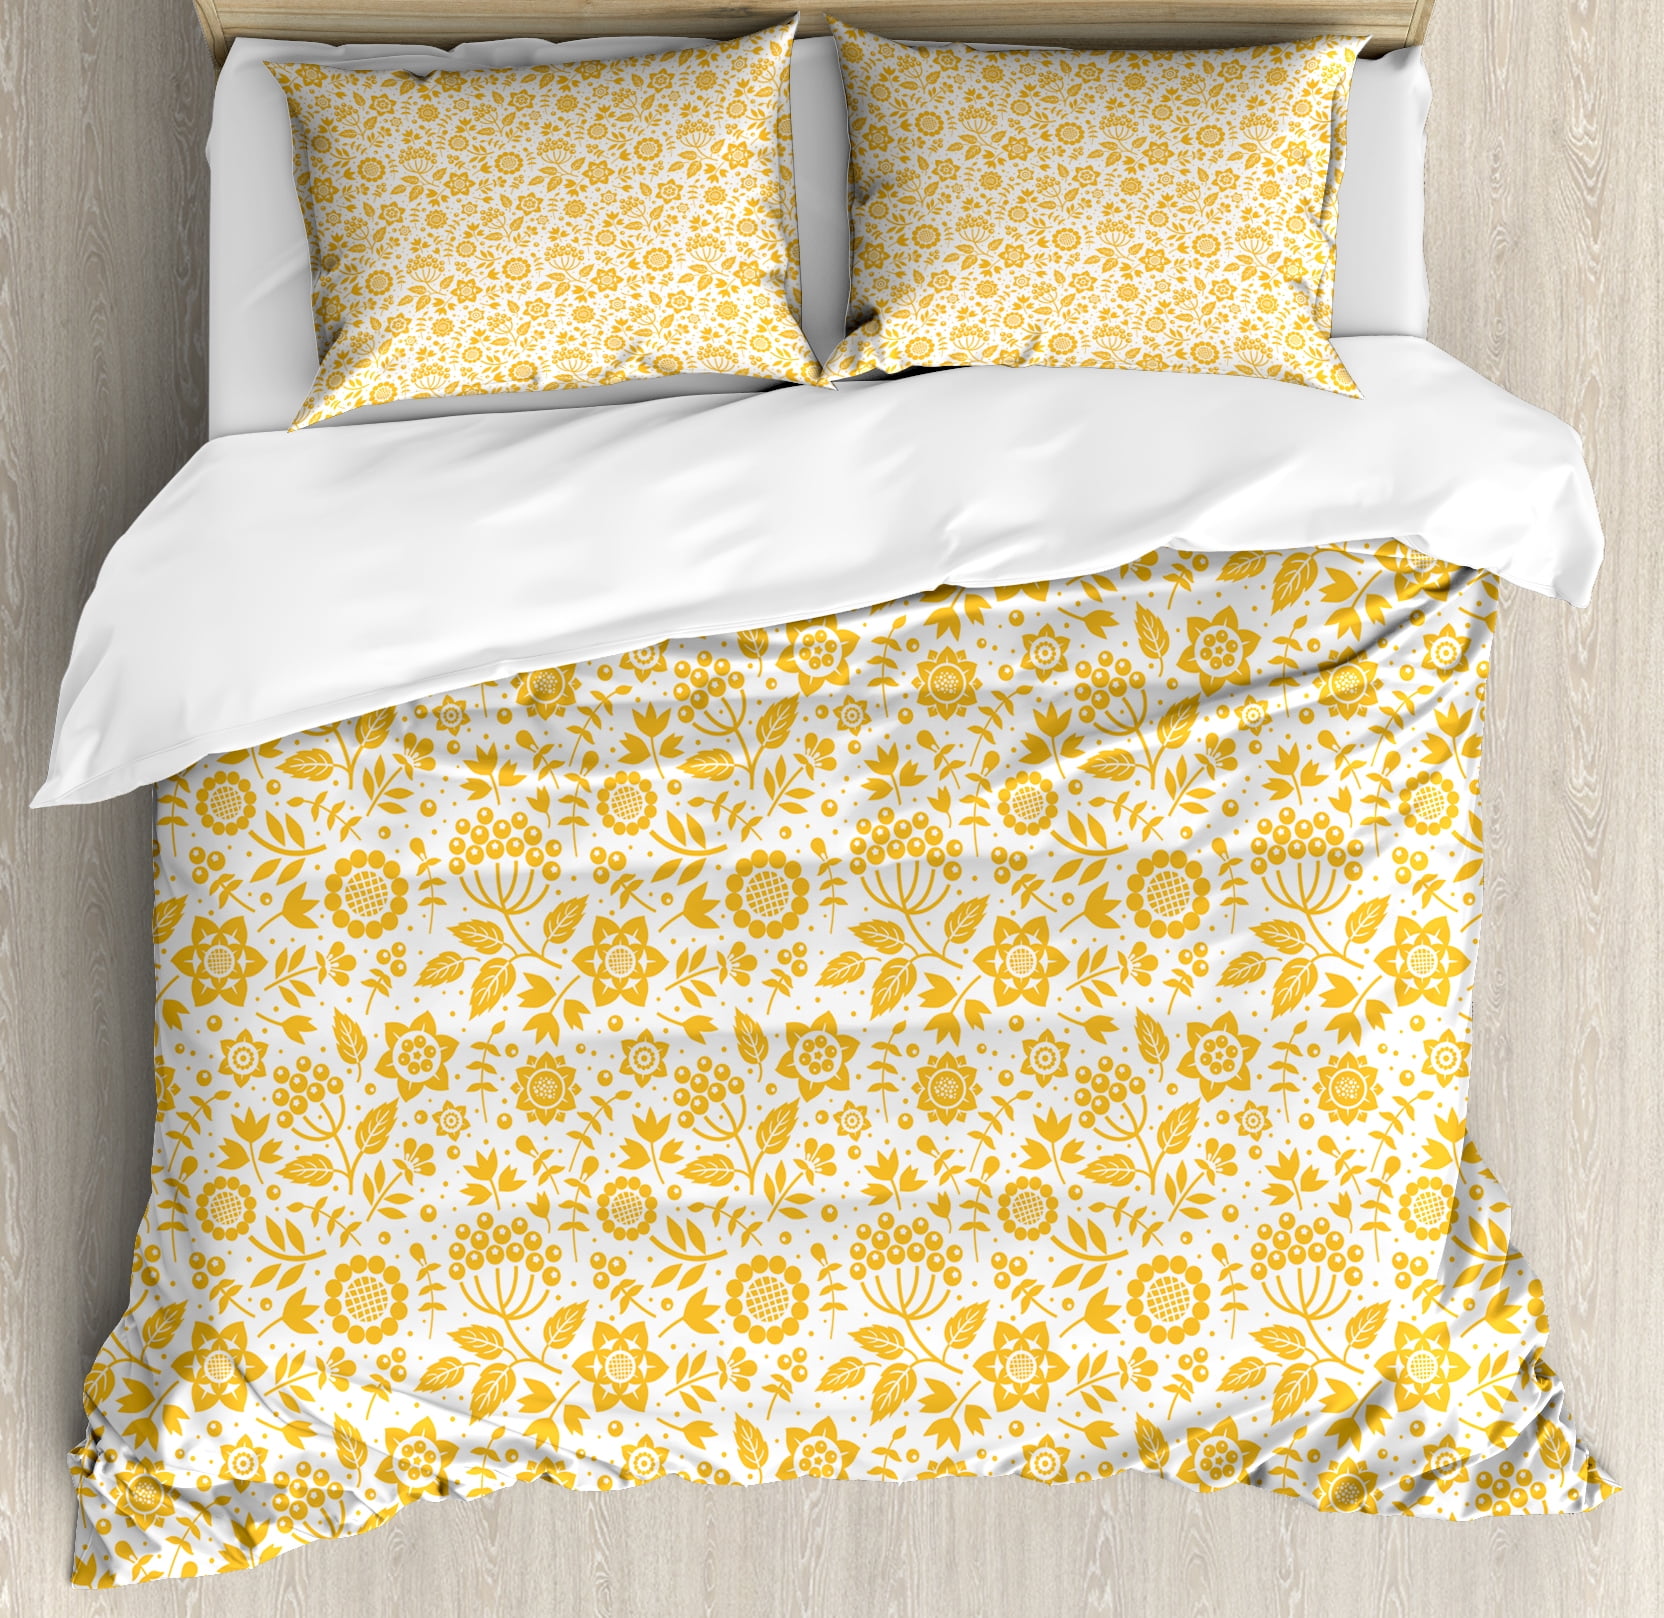 Yellow Flower King Size Duvet Cover Set, Rustic Composition with Berries Twigs Graphic Flora